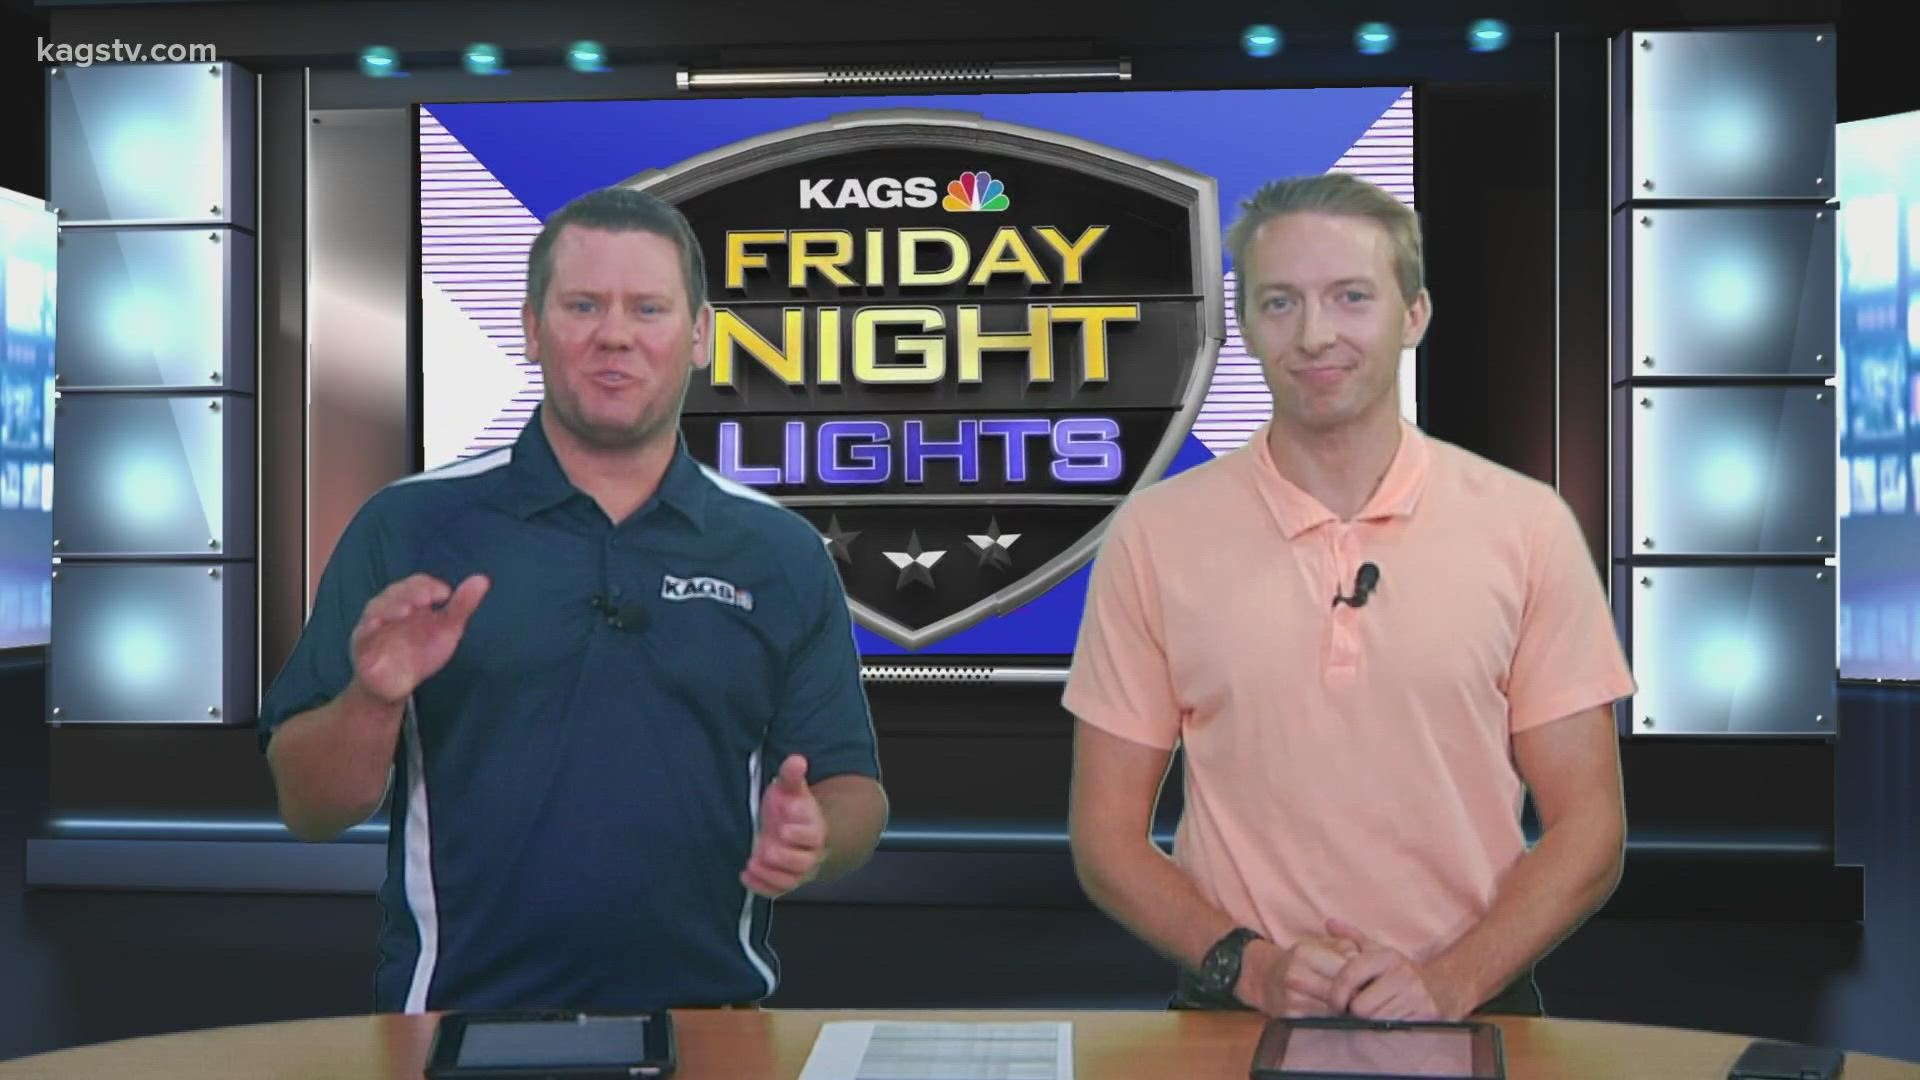 Here is a Week 6 edition of Friday Night Lights. Catch all the scores and highlights from across the Brazos Valley.